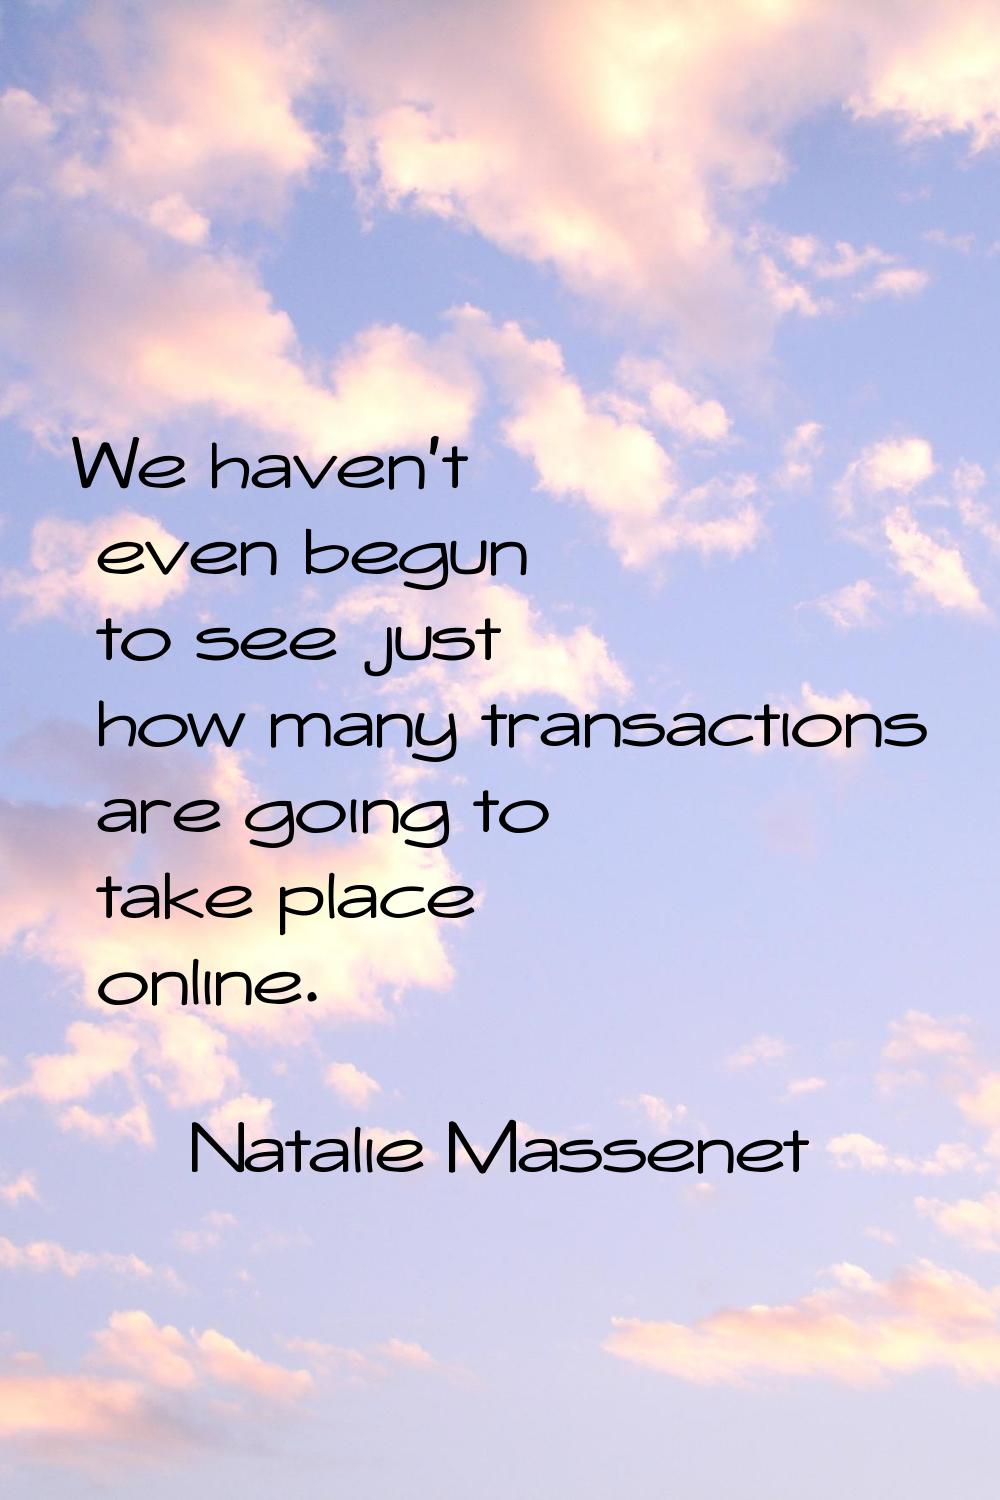 We haven't even begun to see just how many transactions are going to take place online.